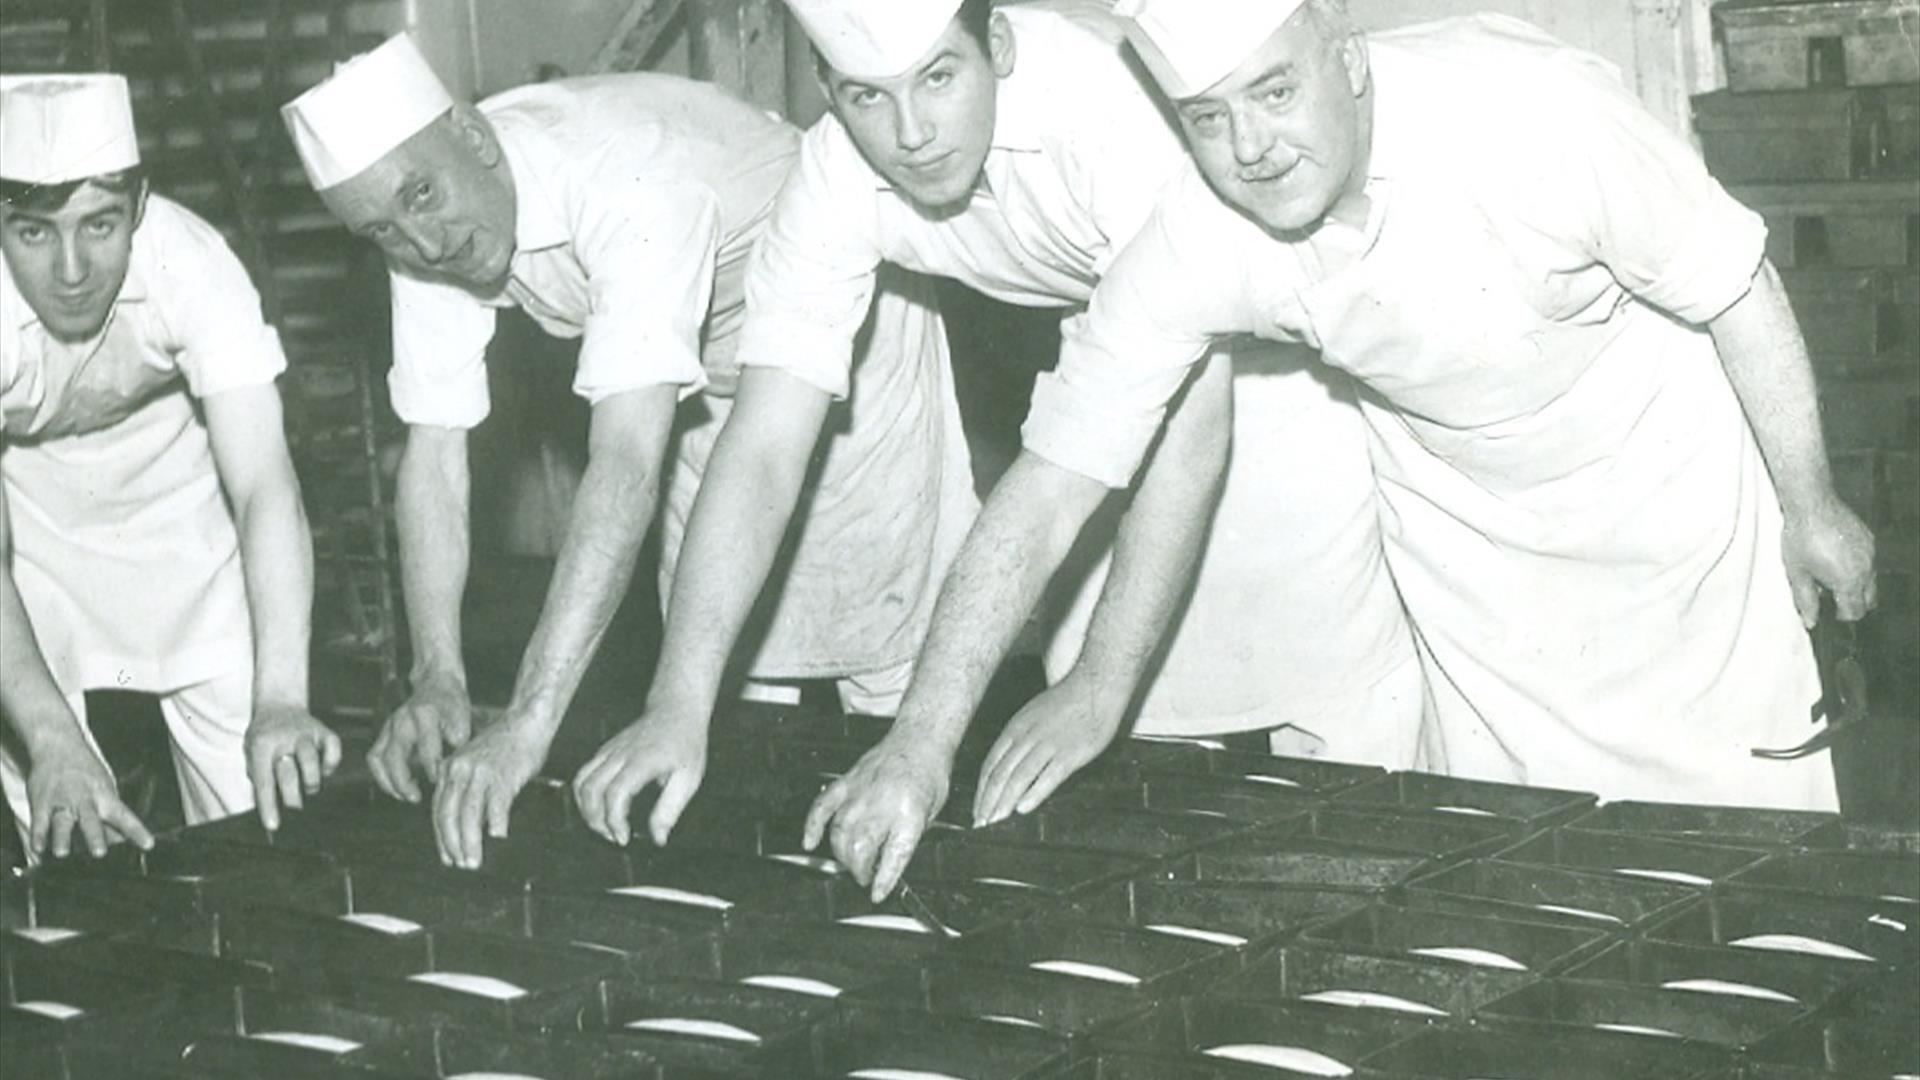 Workers in McCann's Bakery, Newry County Down